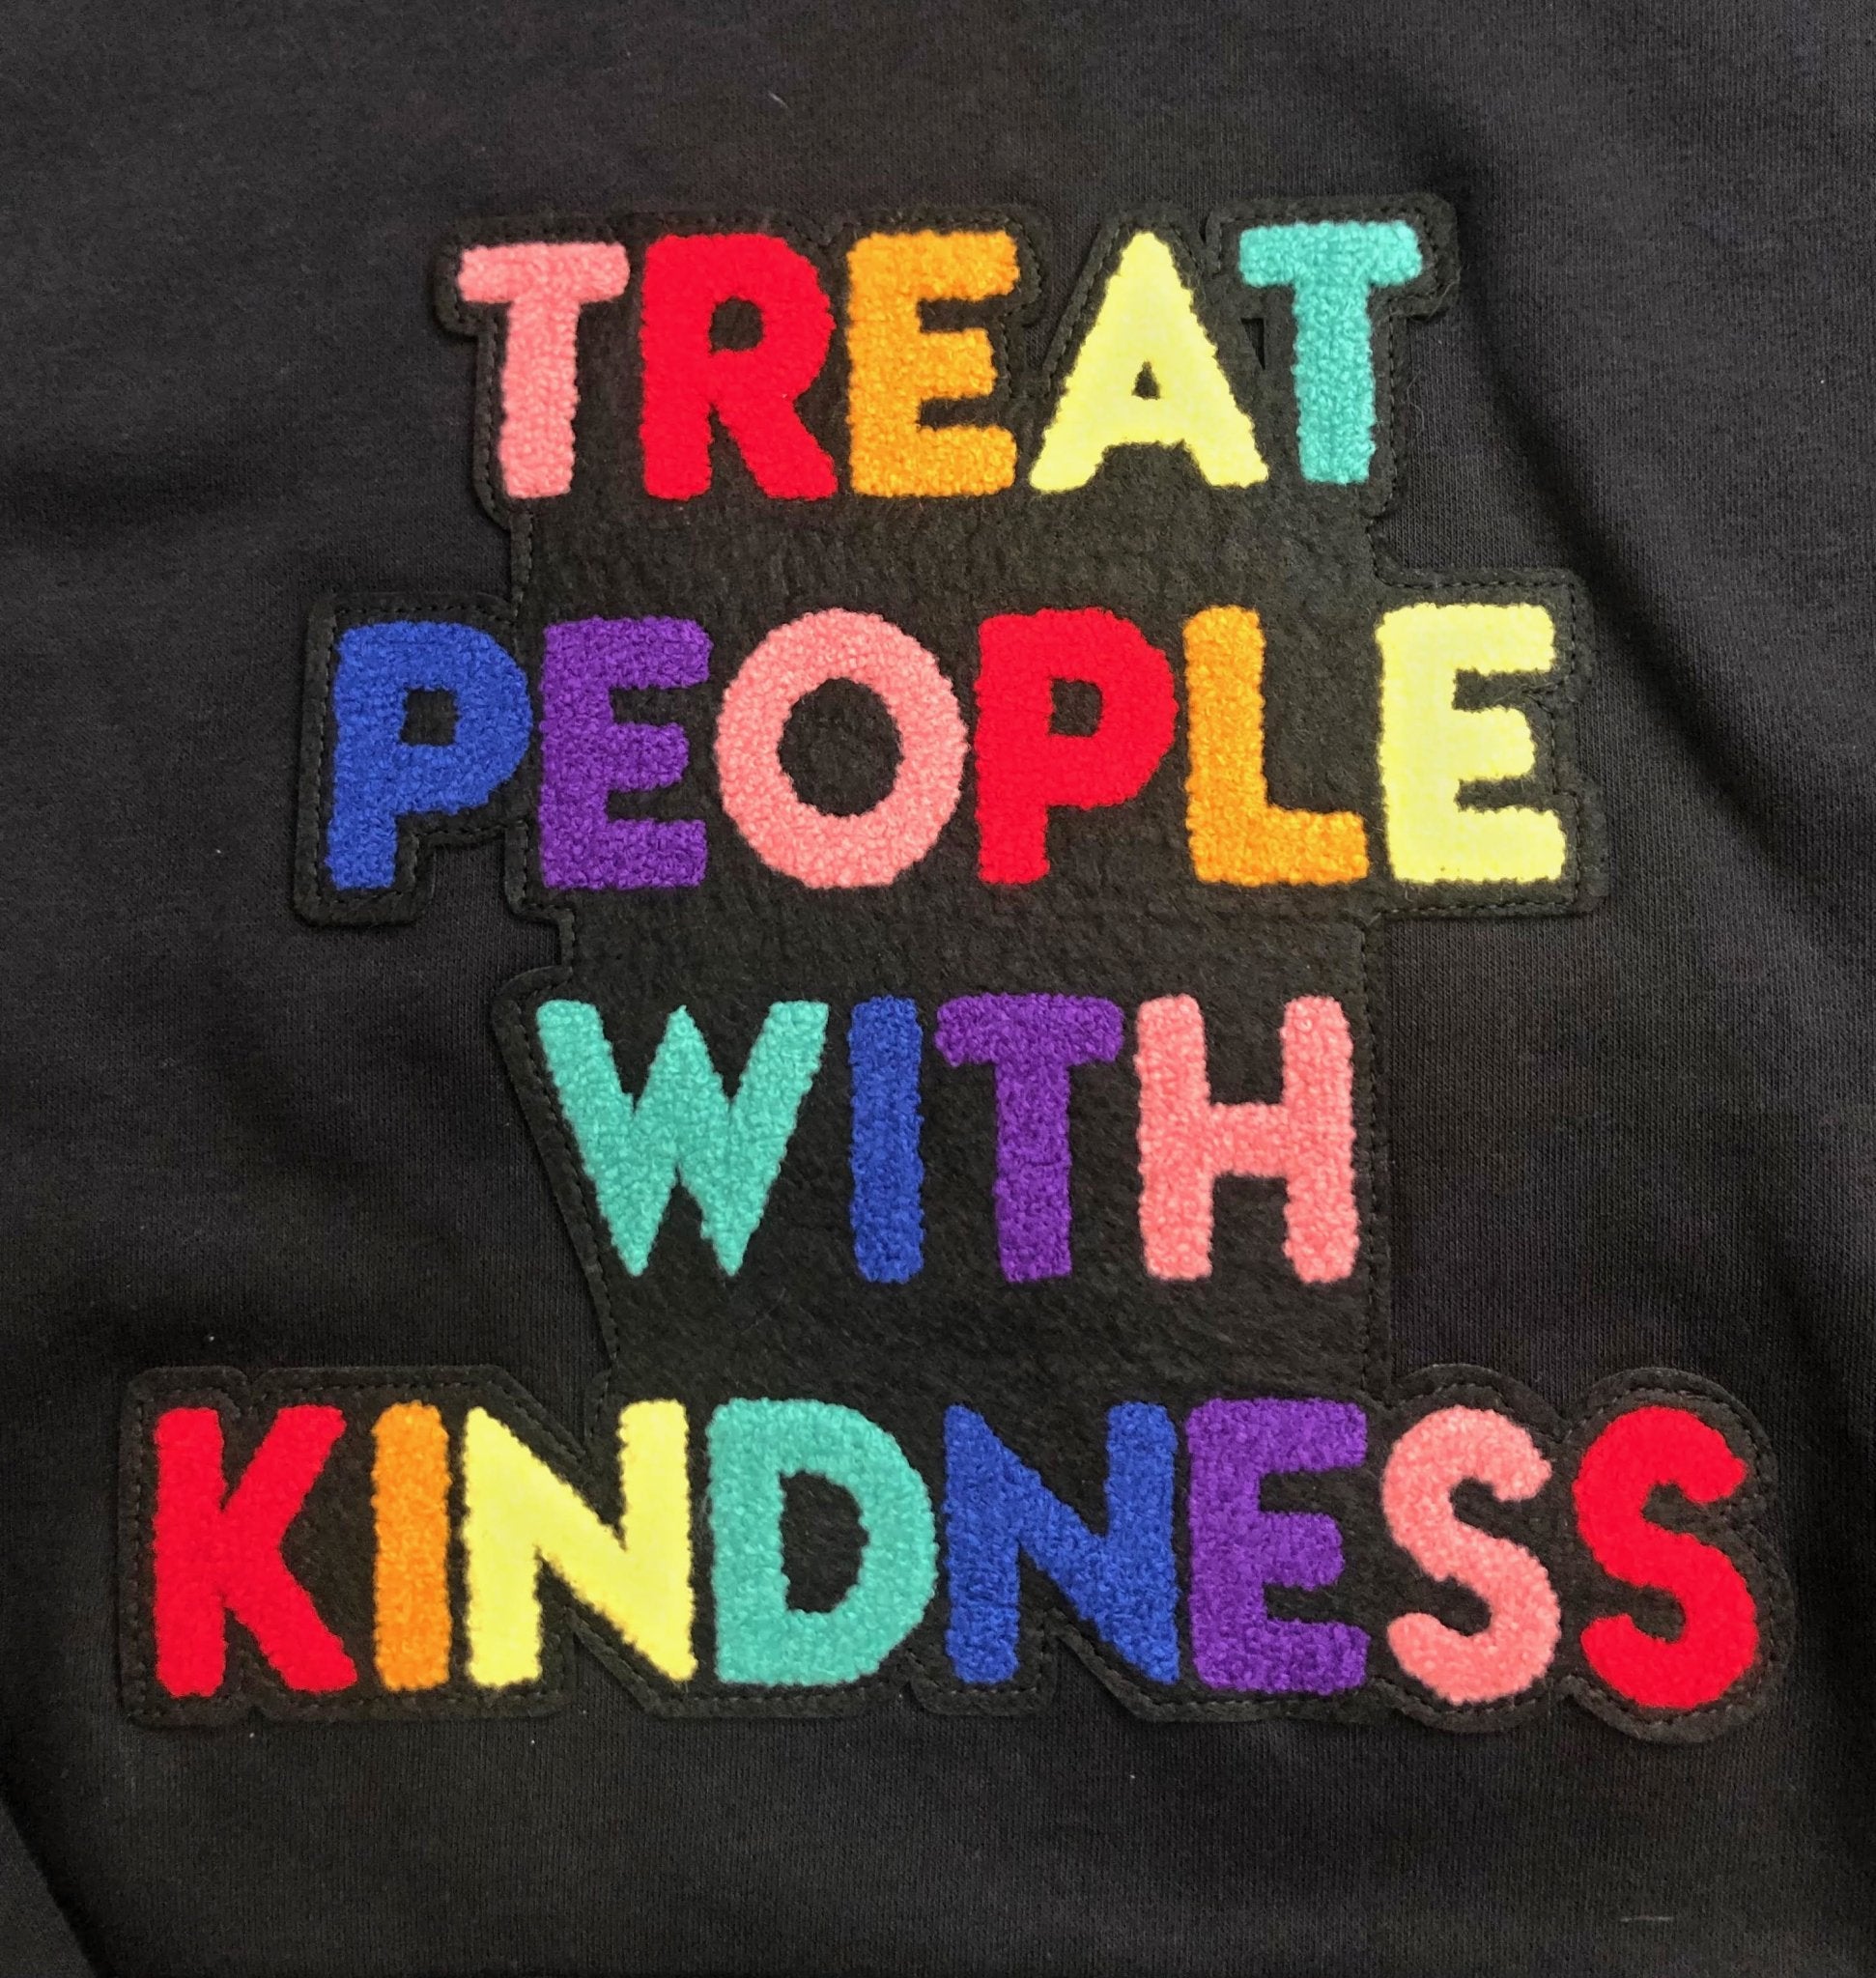 Treat People with Kindness Chenille Patch Unisex Hoodie - The Kindness Cause